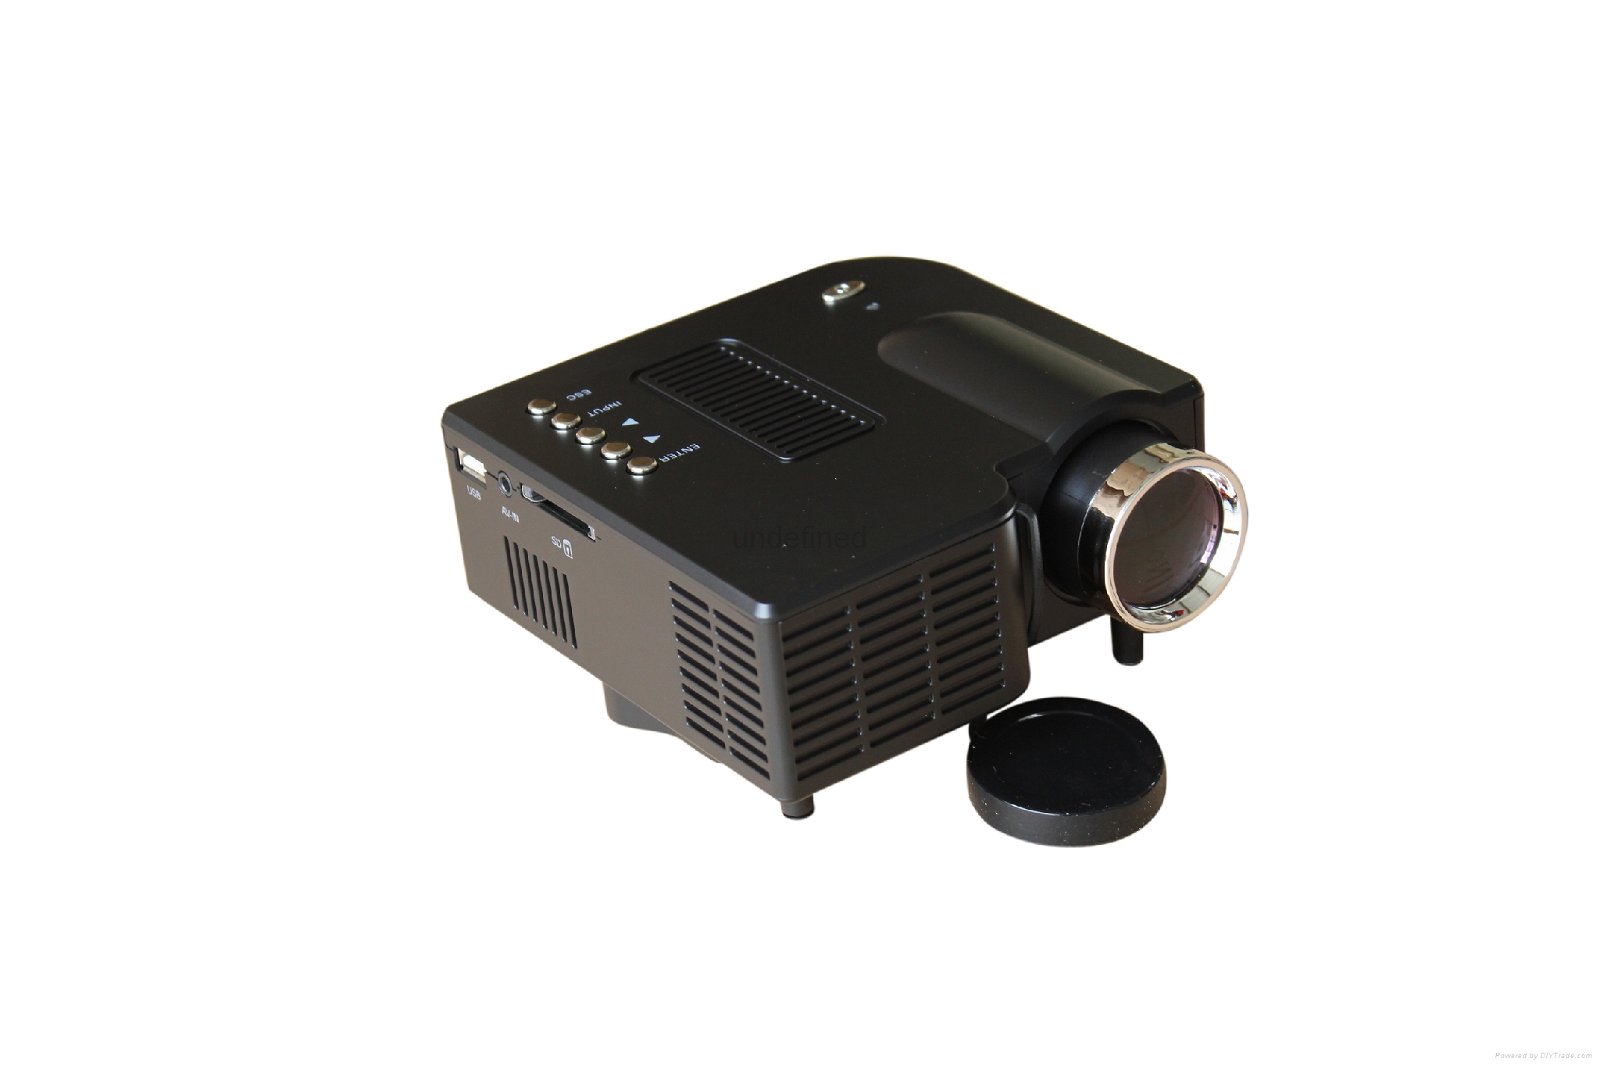 UNIC UC28 home theater projector